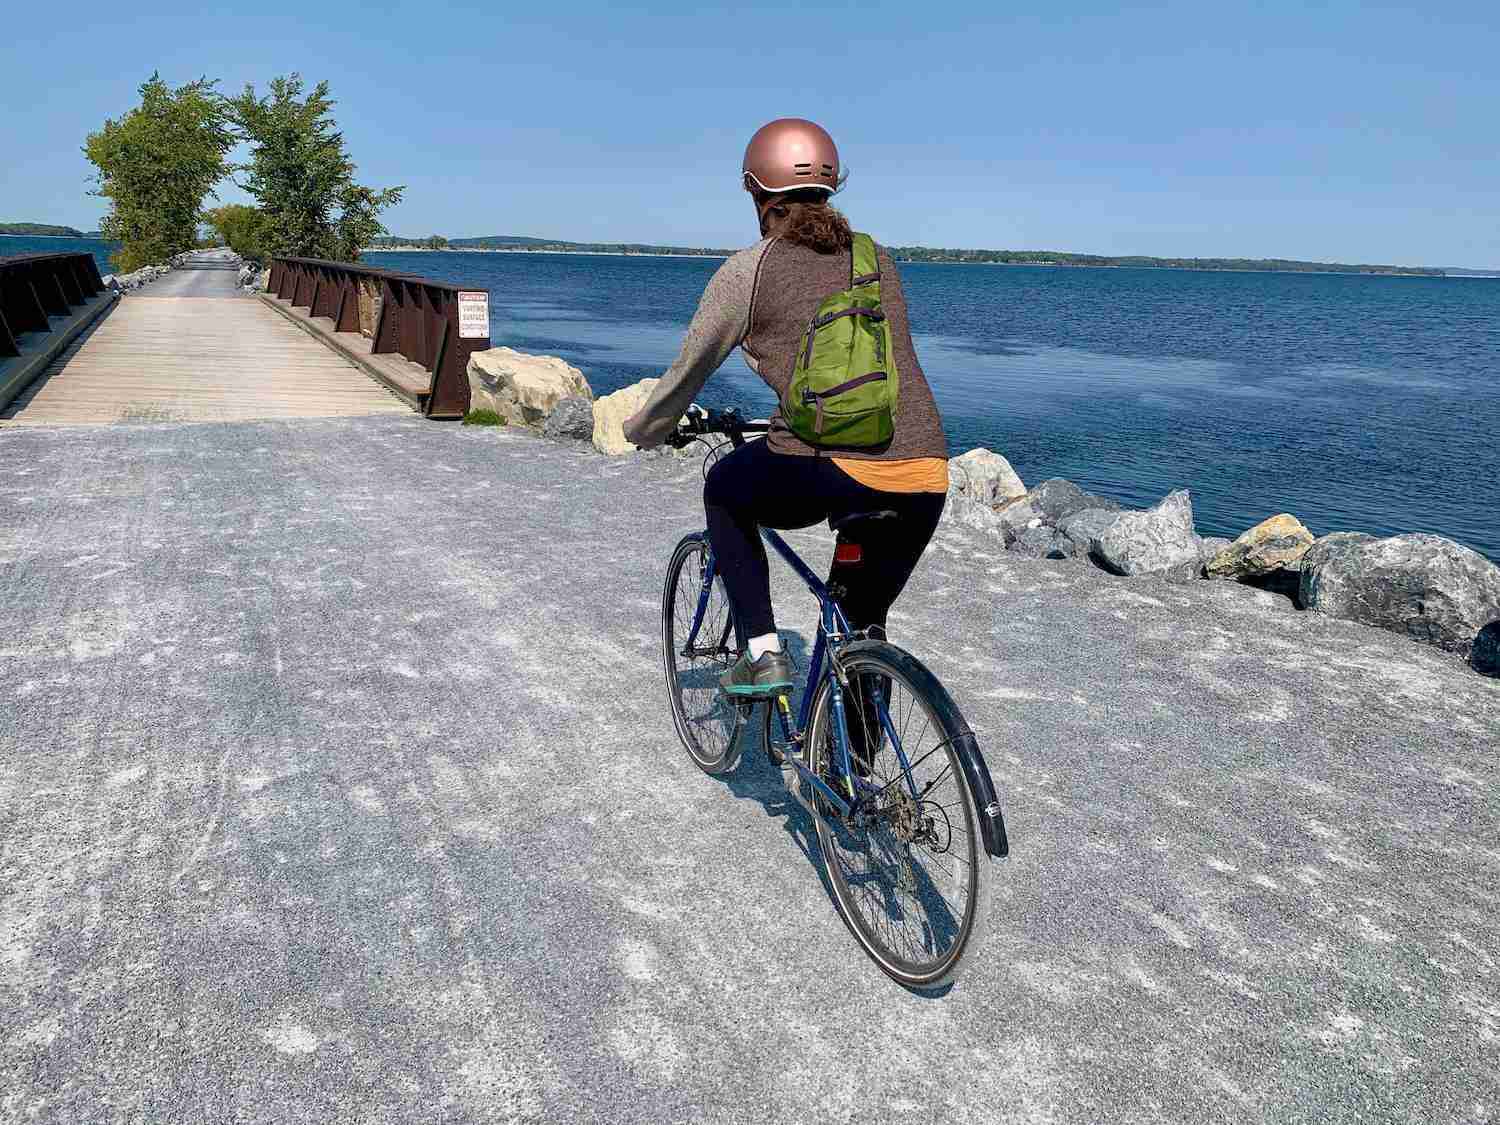 Cycle The Burlington Bike Path For The Best Views Of Lake Champlain